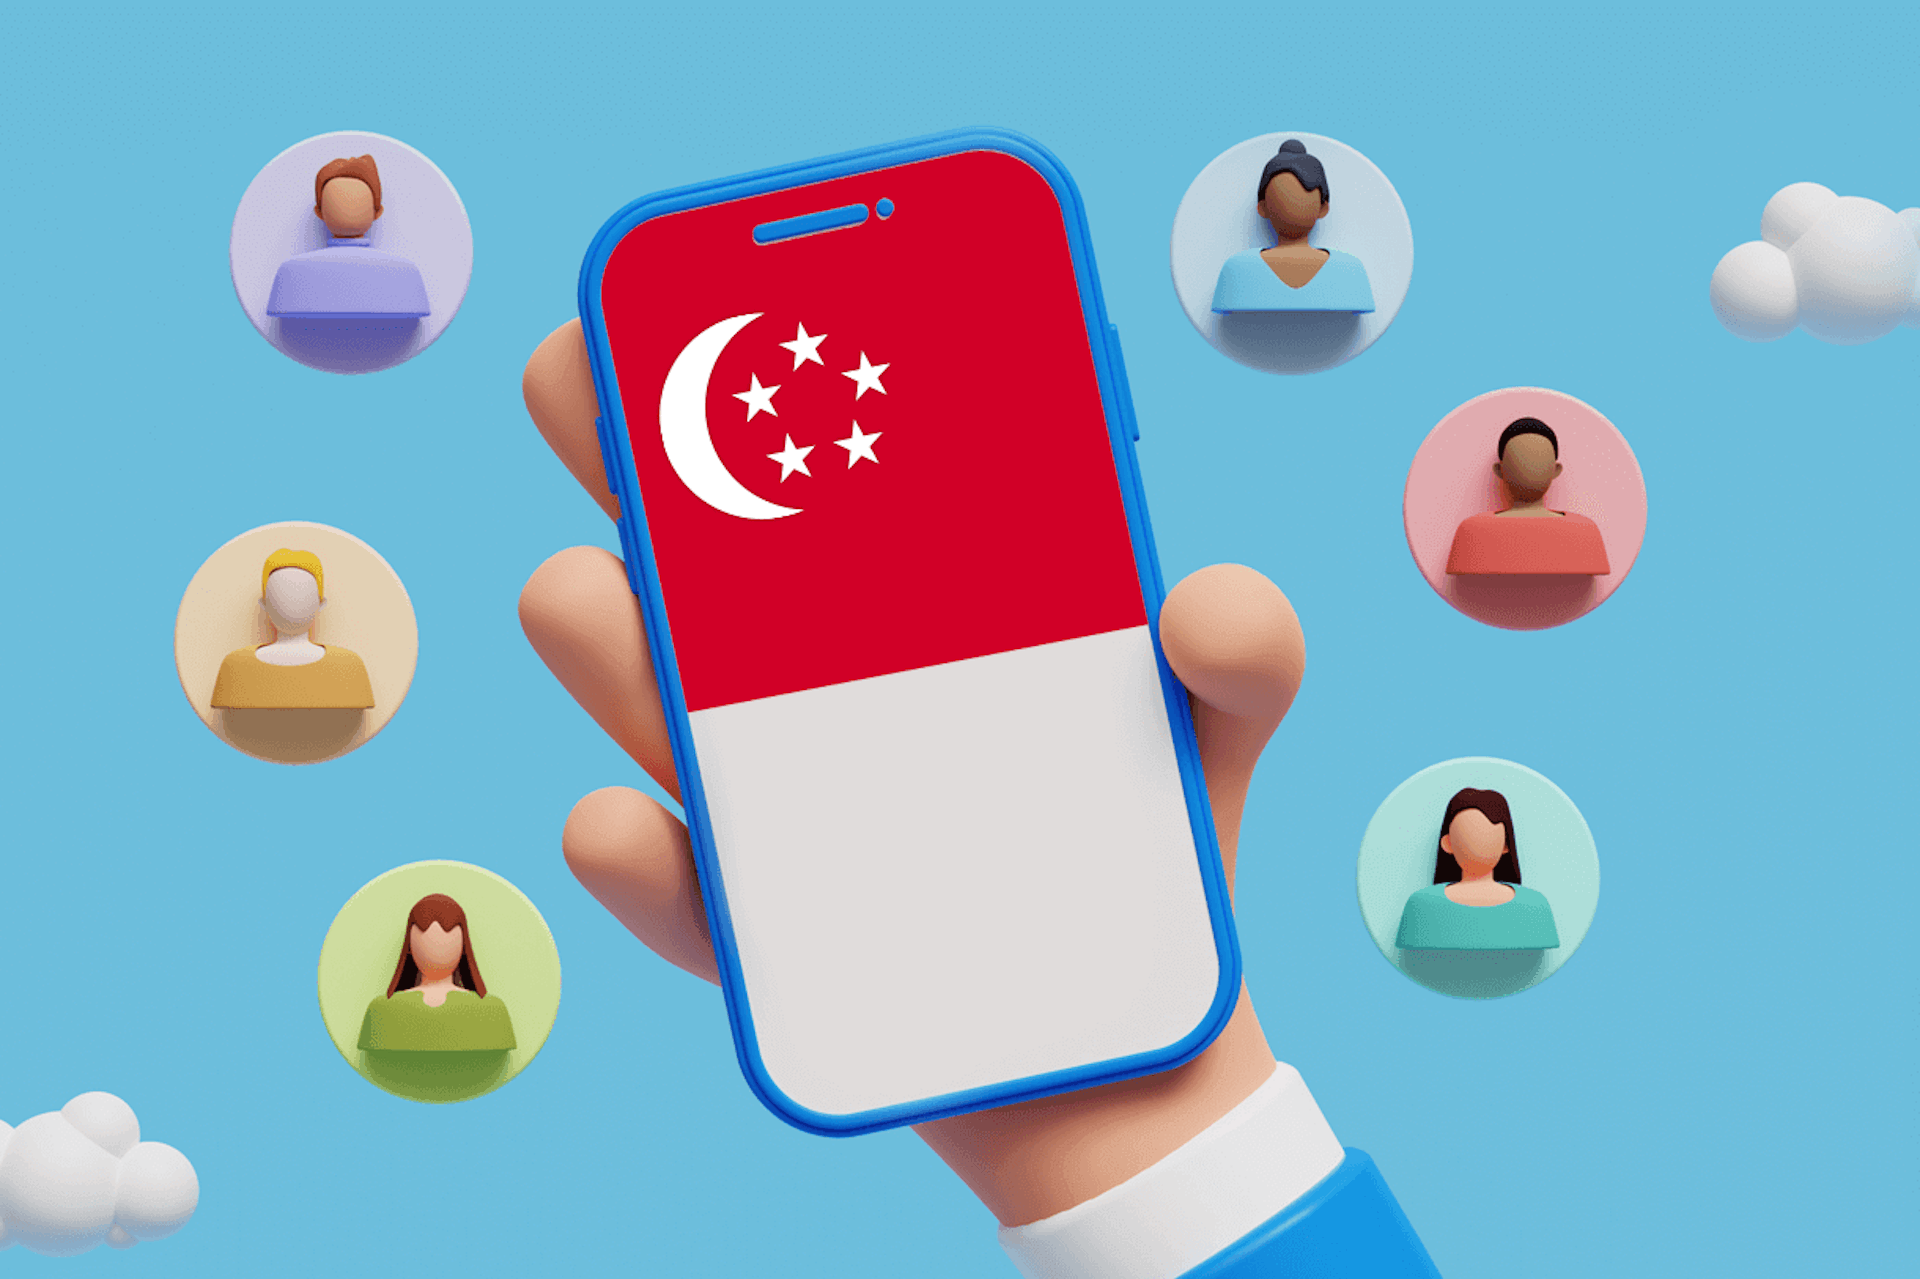 3D illustration of a hand holding a smartphone with the Singaporean flag and influencers around it as the header for our blog with the top Instagram influencers in Singapore.